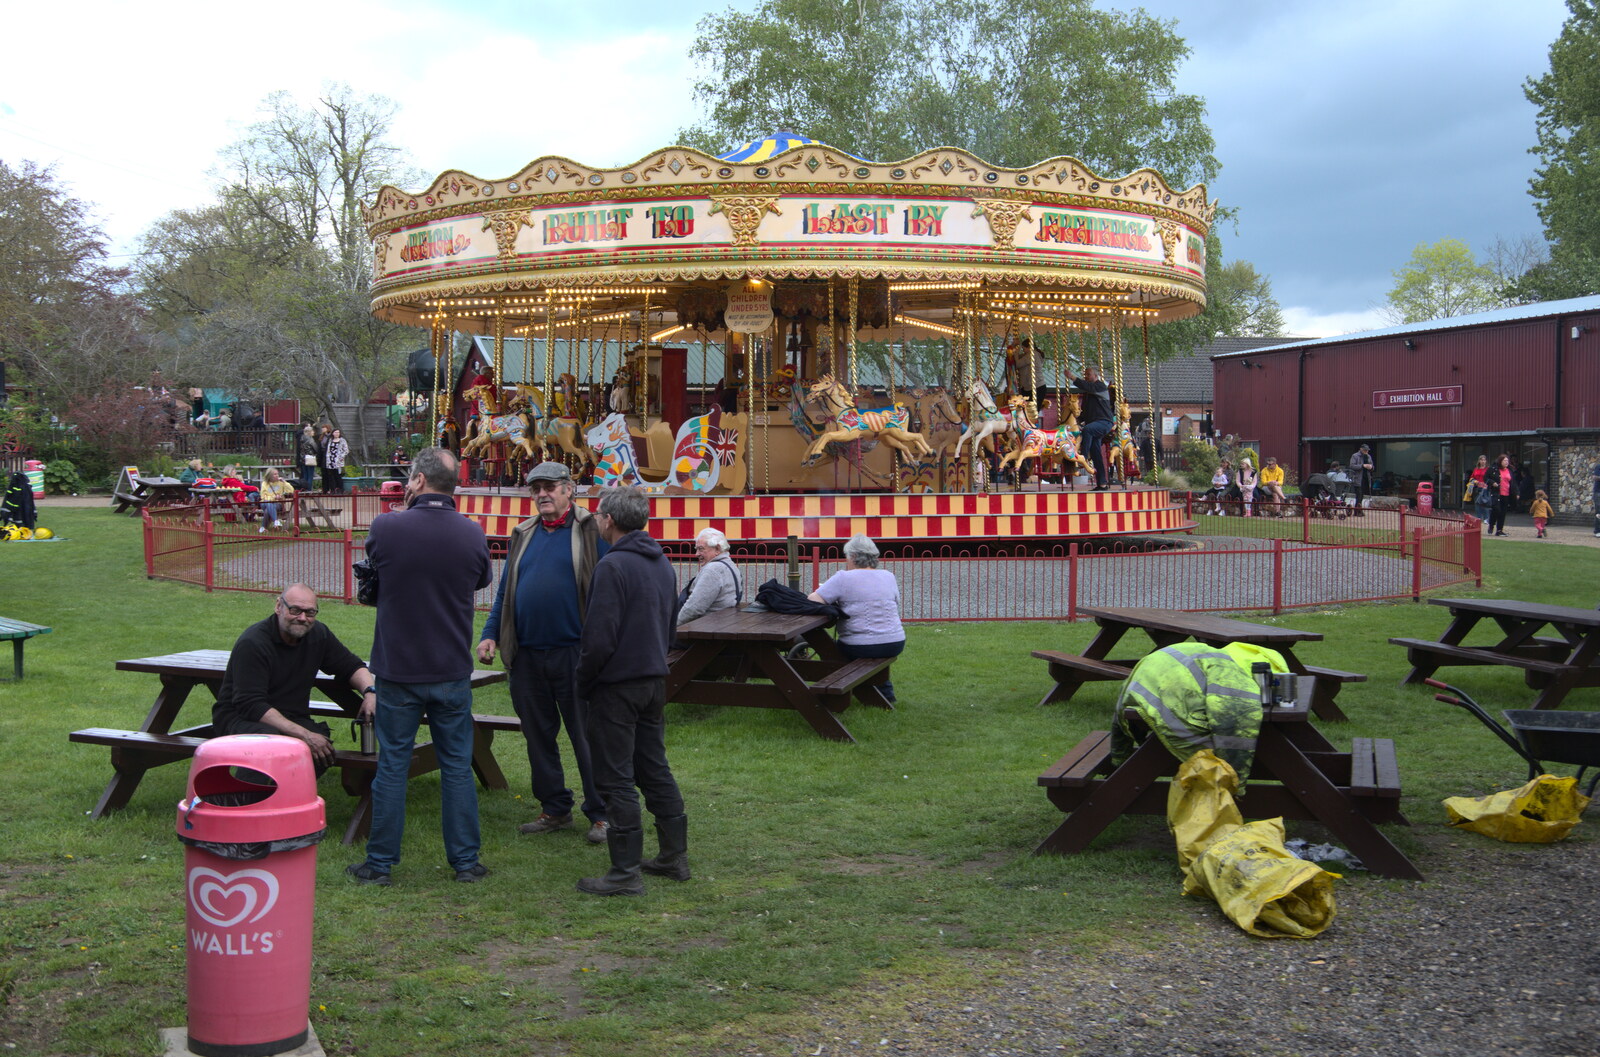 Hanging around near the carousel from The Heritage Steam Gala, Bressingham Steam Museum, Norfolk - 1st May 2023